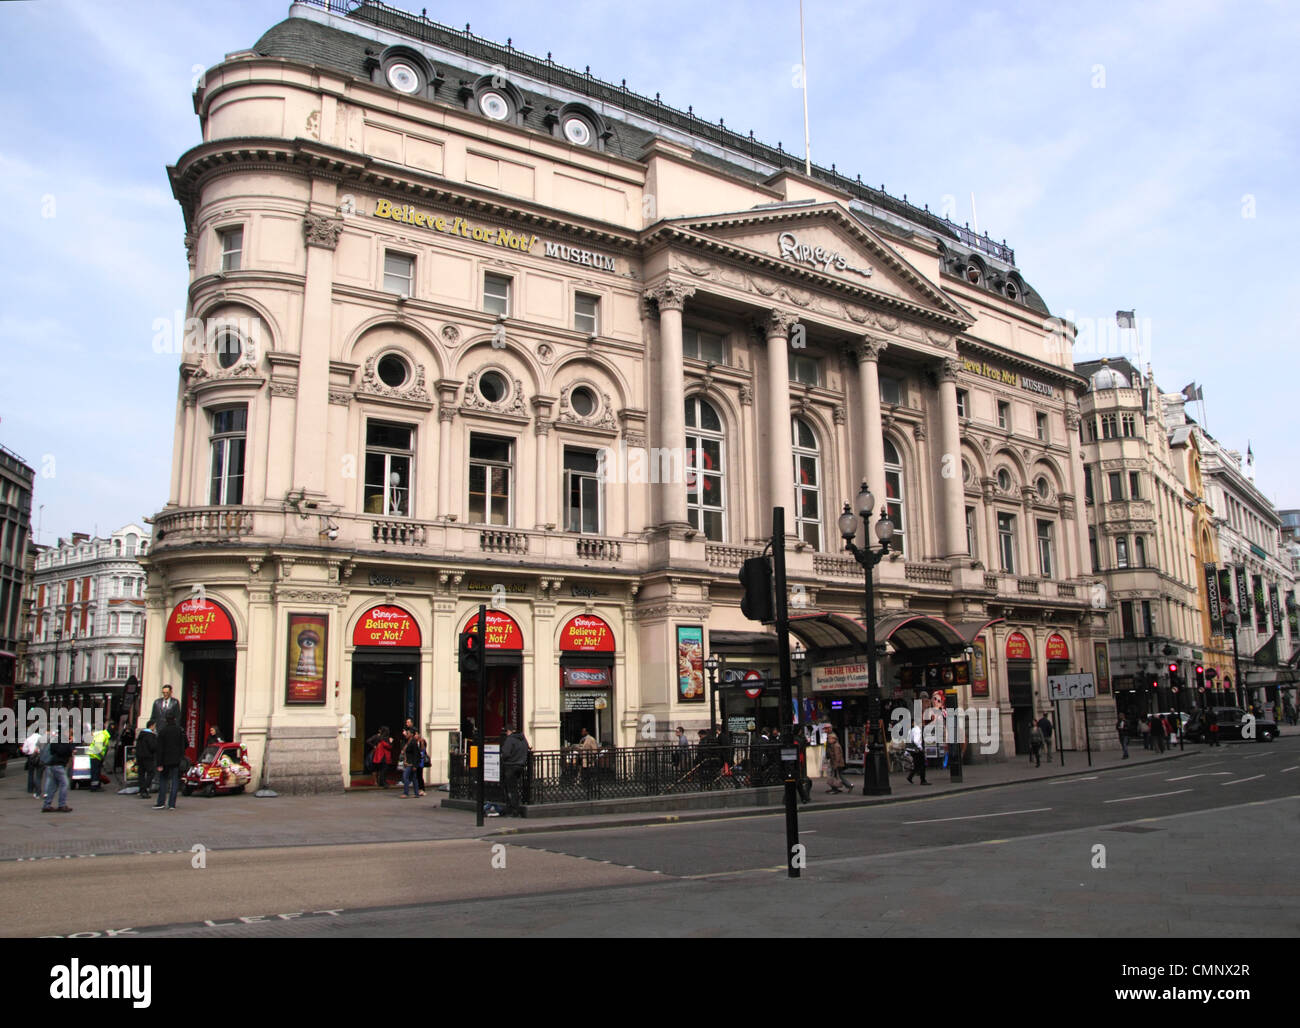 Ripleys Believe it or Not Museum Piccadilly Circus Londres Banque D'Images